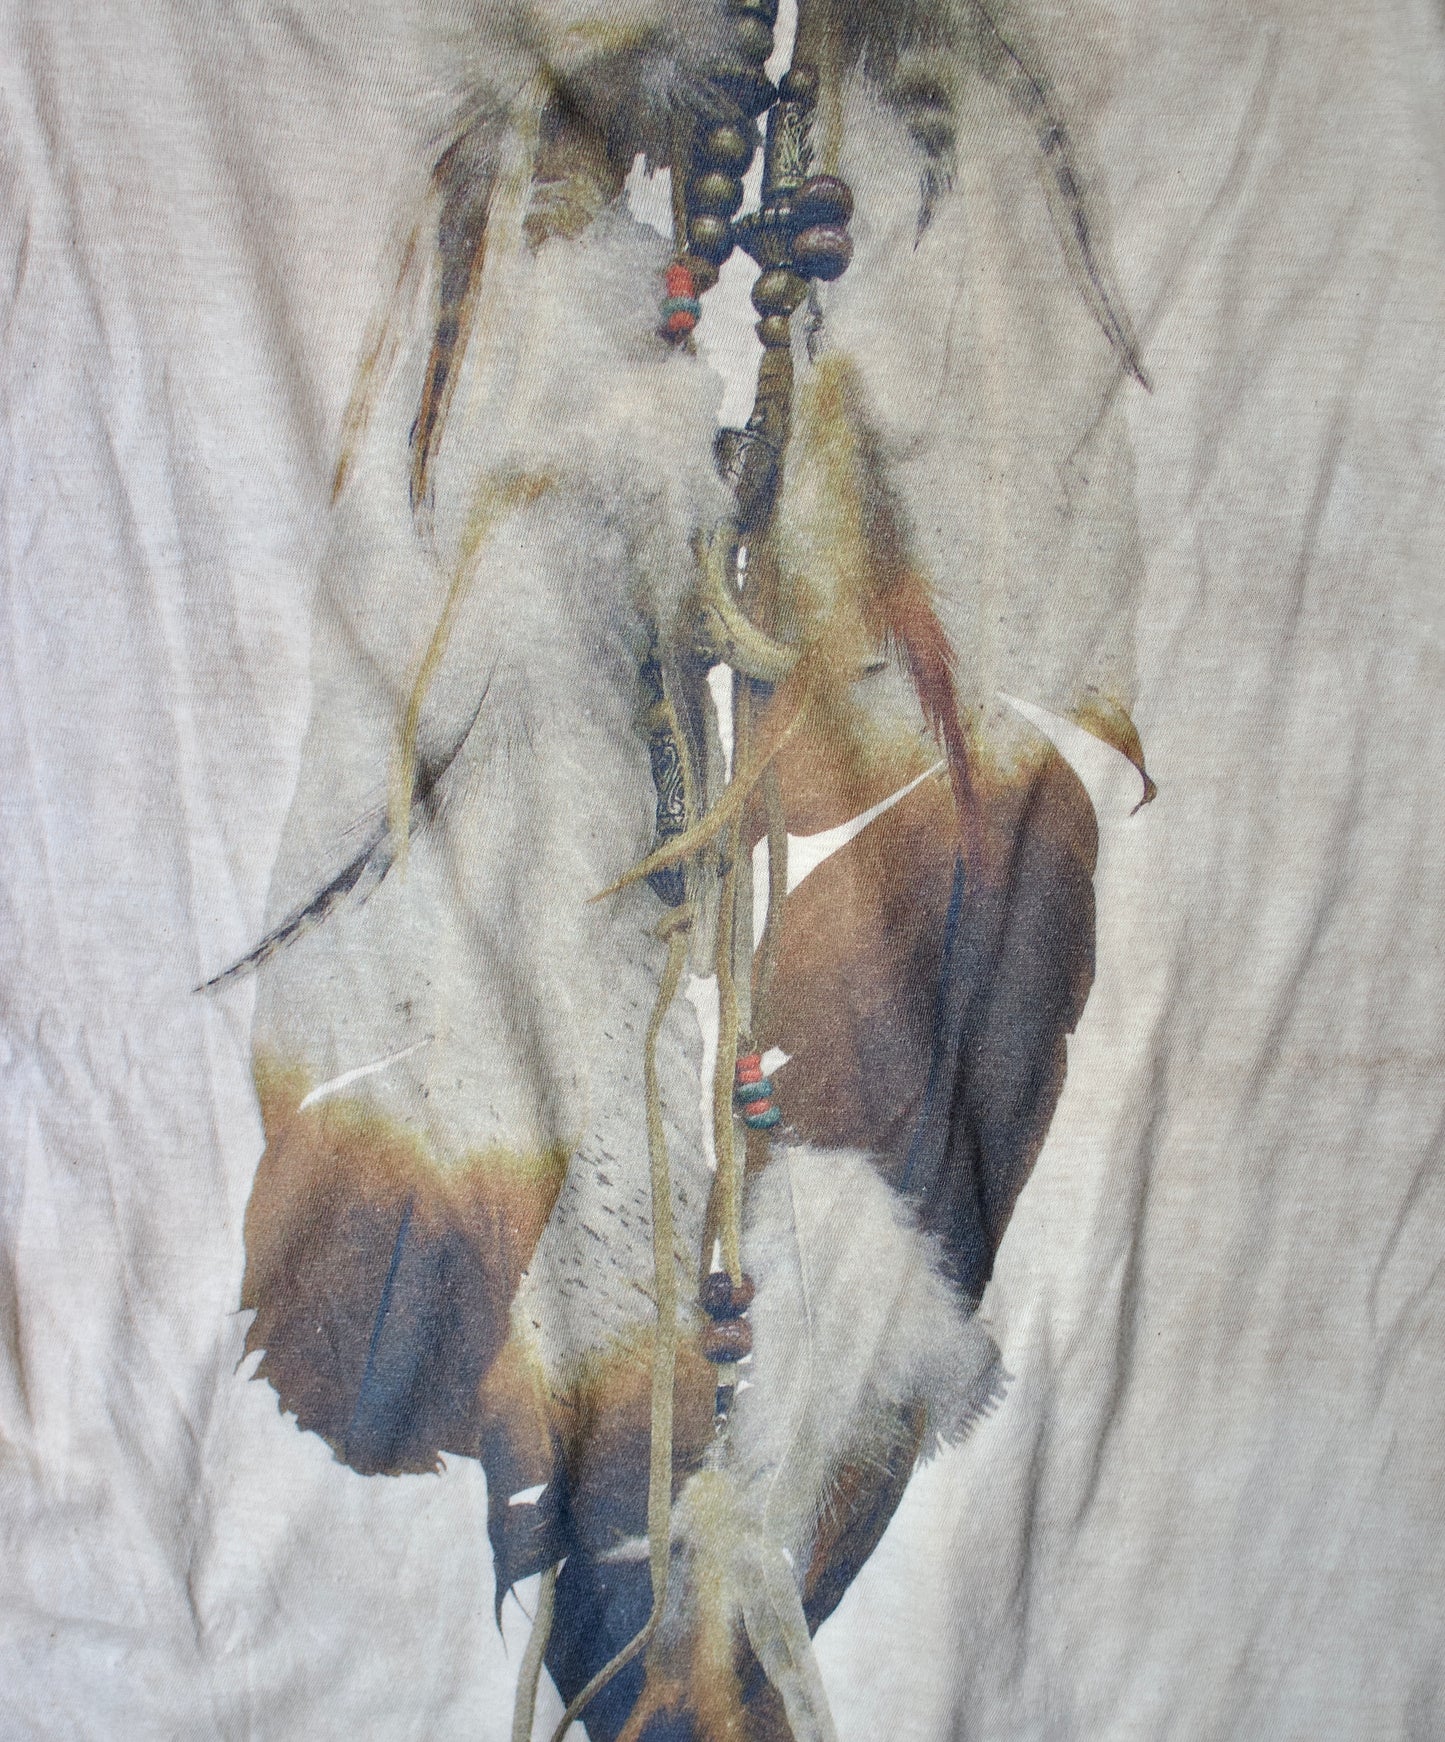 G.O.A Early 00s Distressed “Indian Commandment” Rusty Feather T-shirt